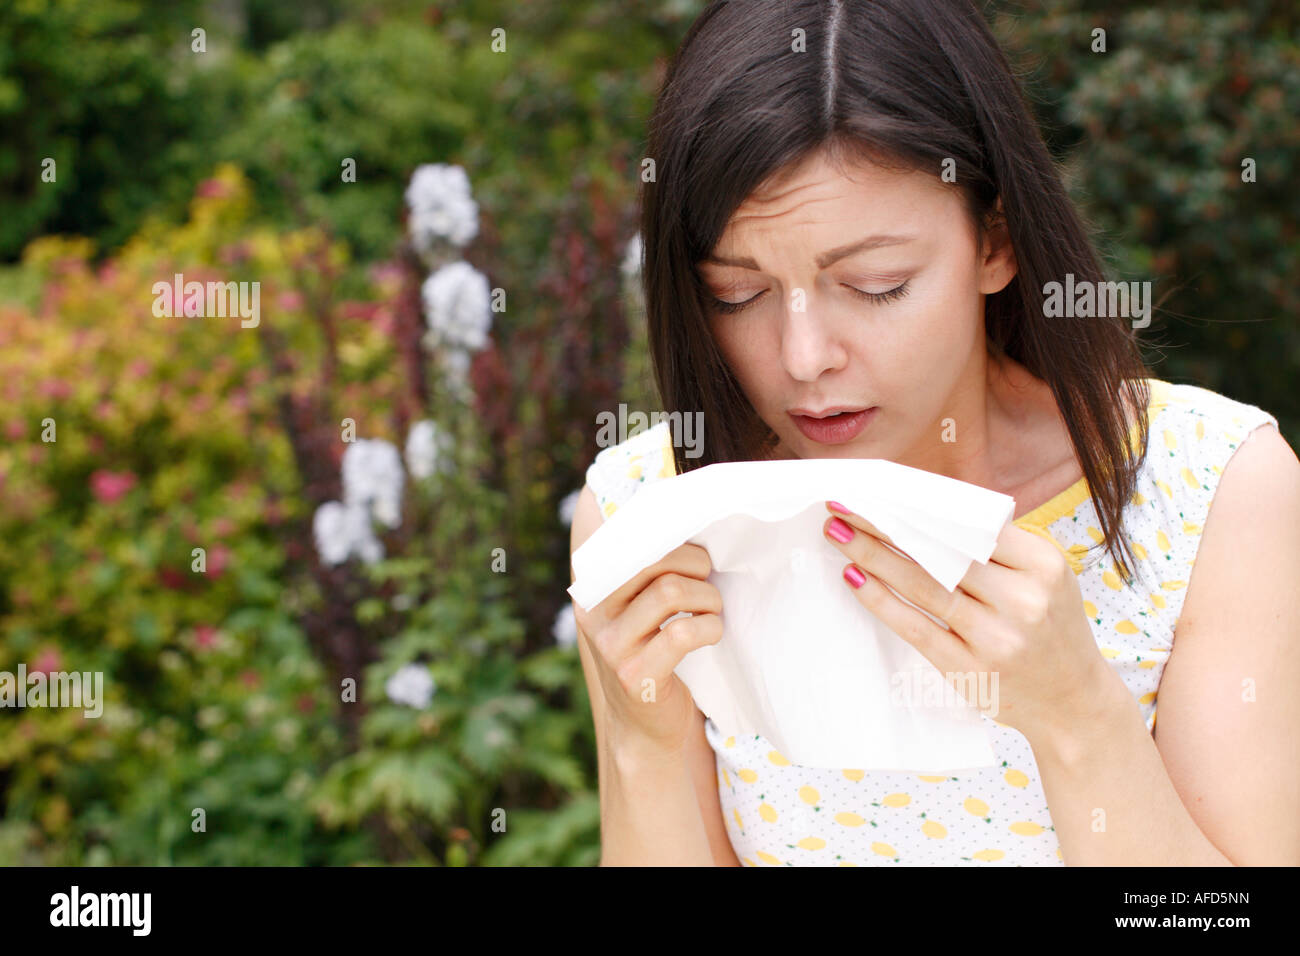 woman sneezing from hayfever Stock Photo